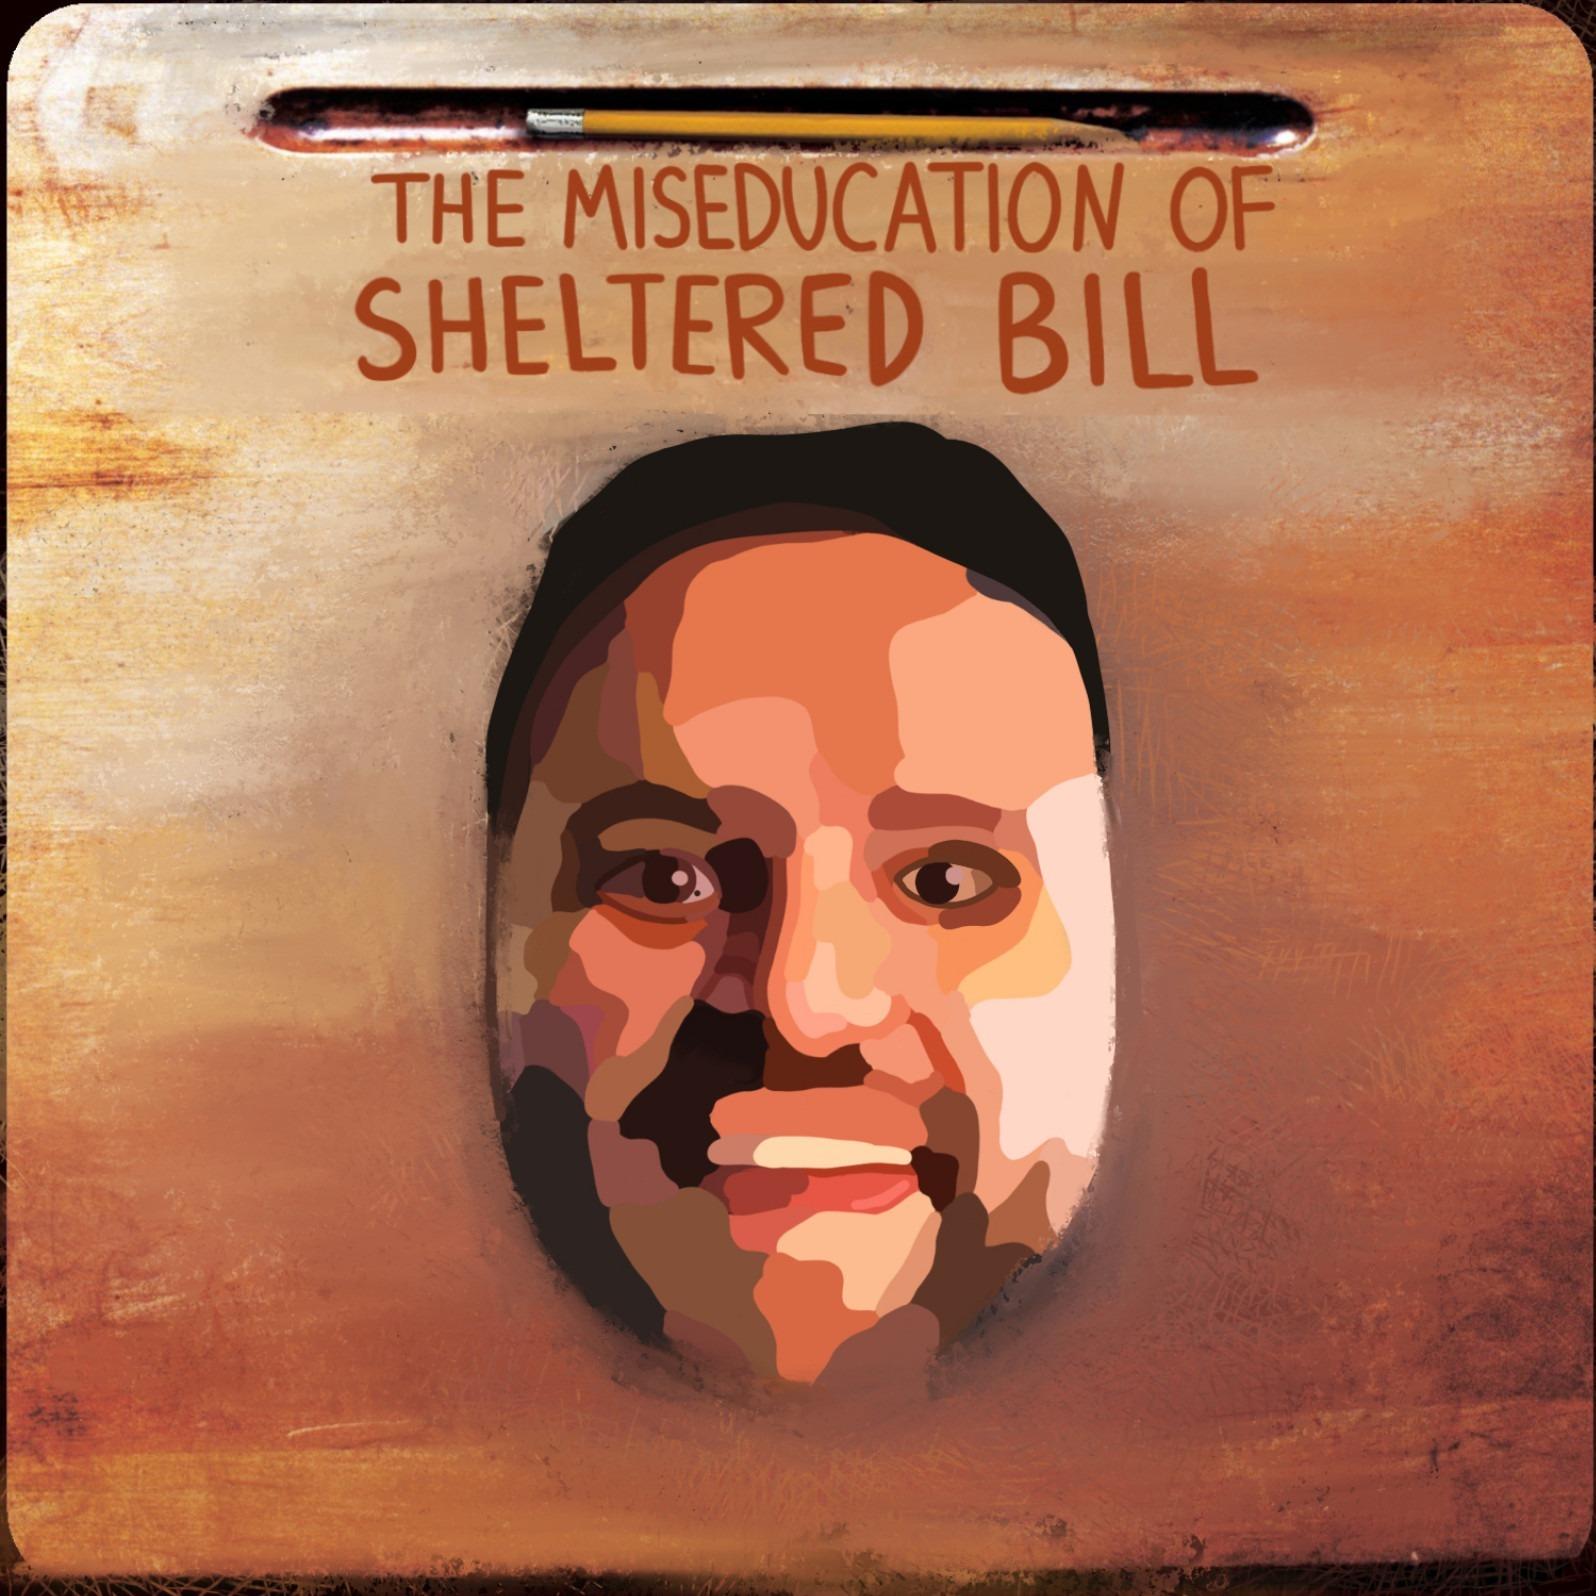 The Miseducation of Sheltered Bill